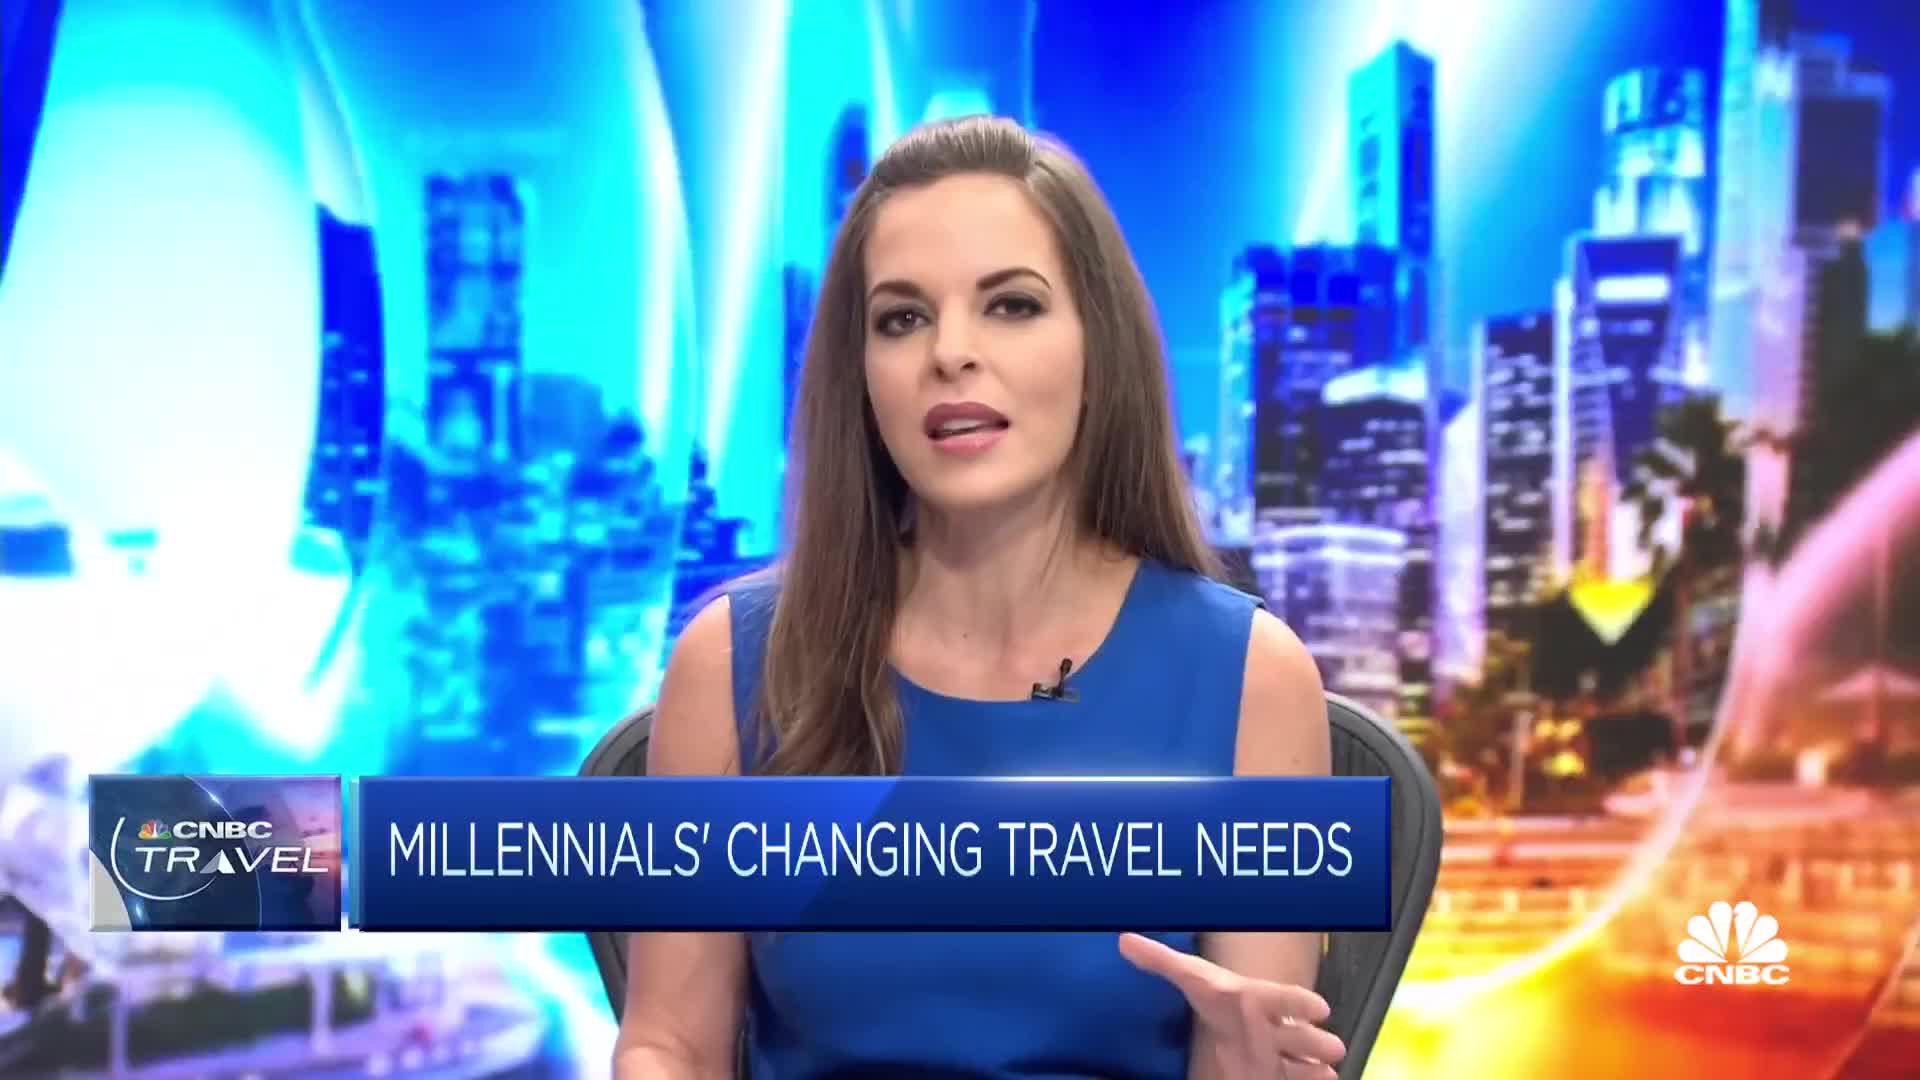 Millennials’ vacation patterns are shifting — partying is out, these 3 items are in